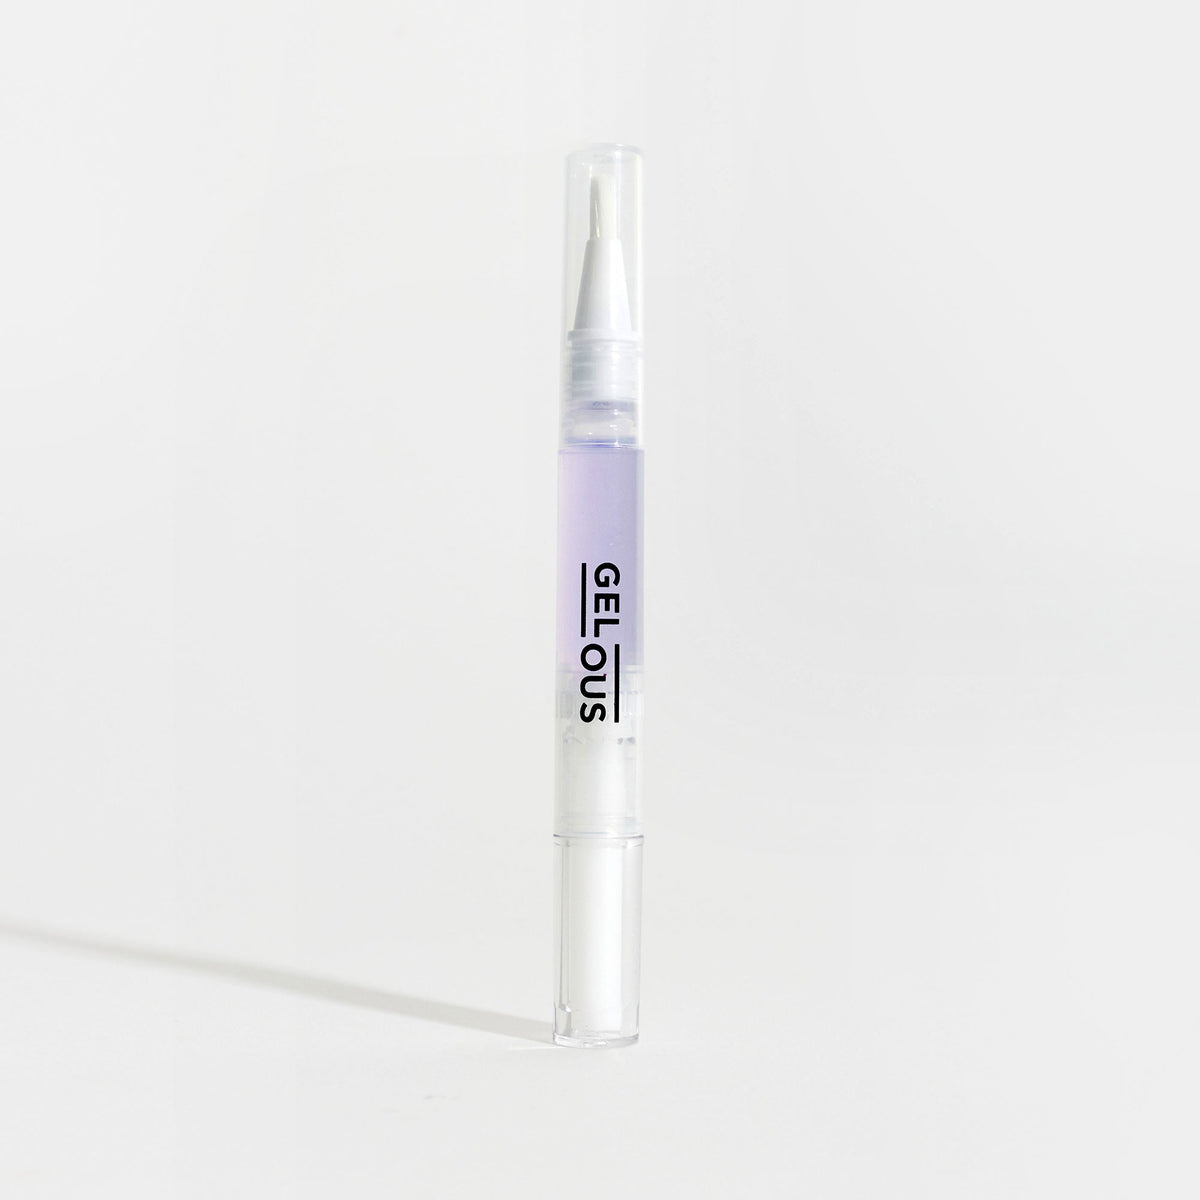 Gelous Lavender Cuticle Oil - photographed in New Zealand with model